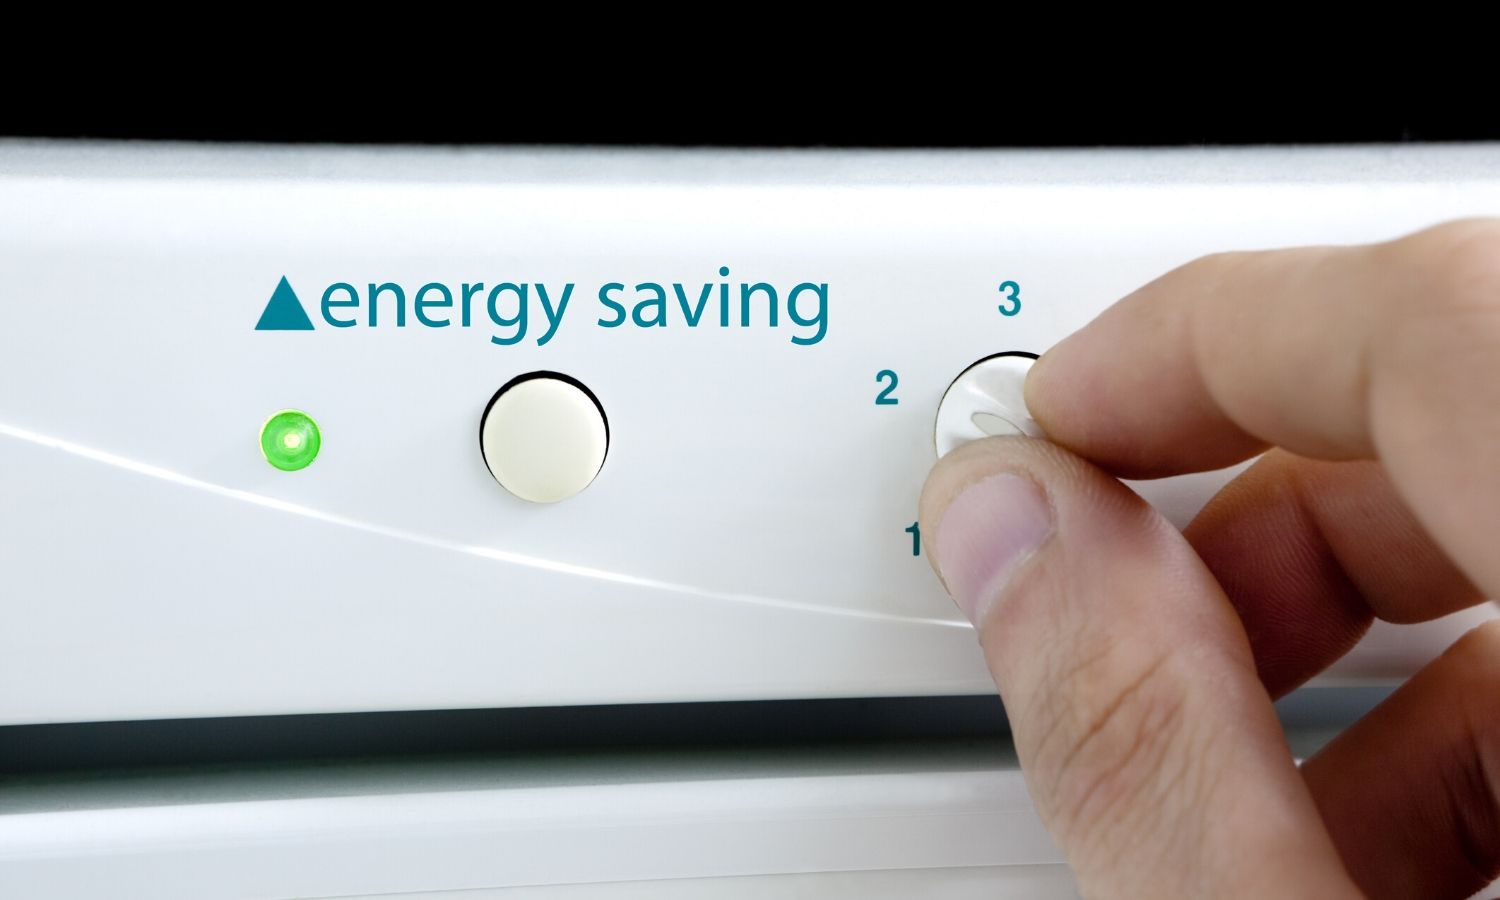 What didn’t you know about smart power consumption? The 6 advantages of intelligent energy consumption